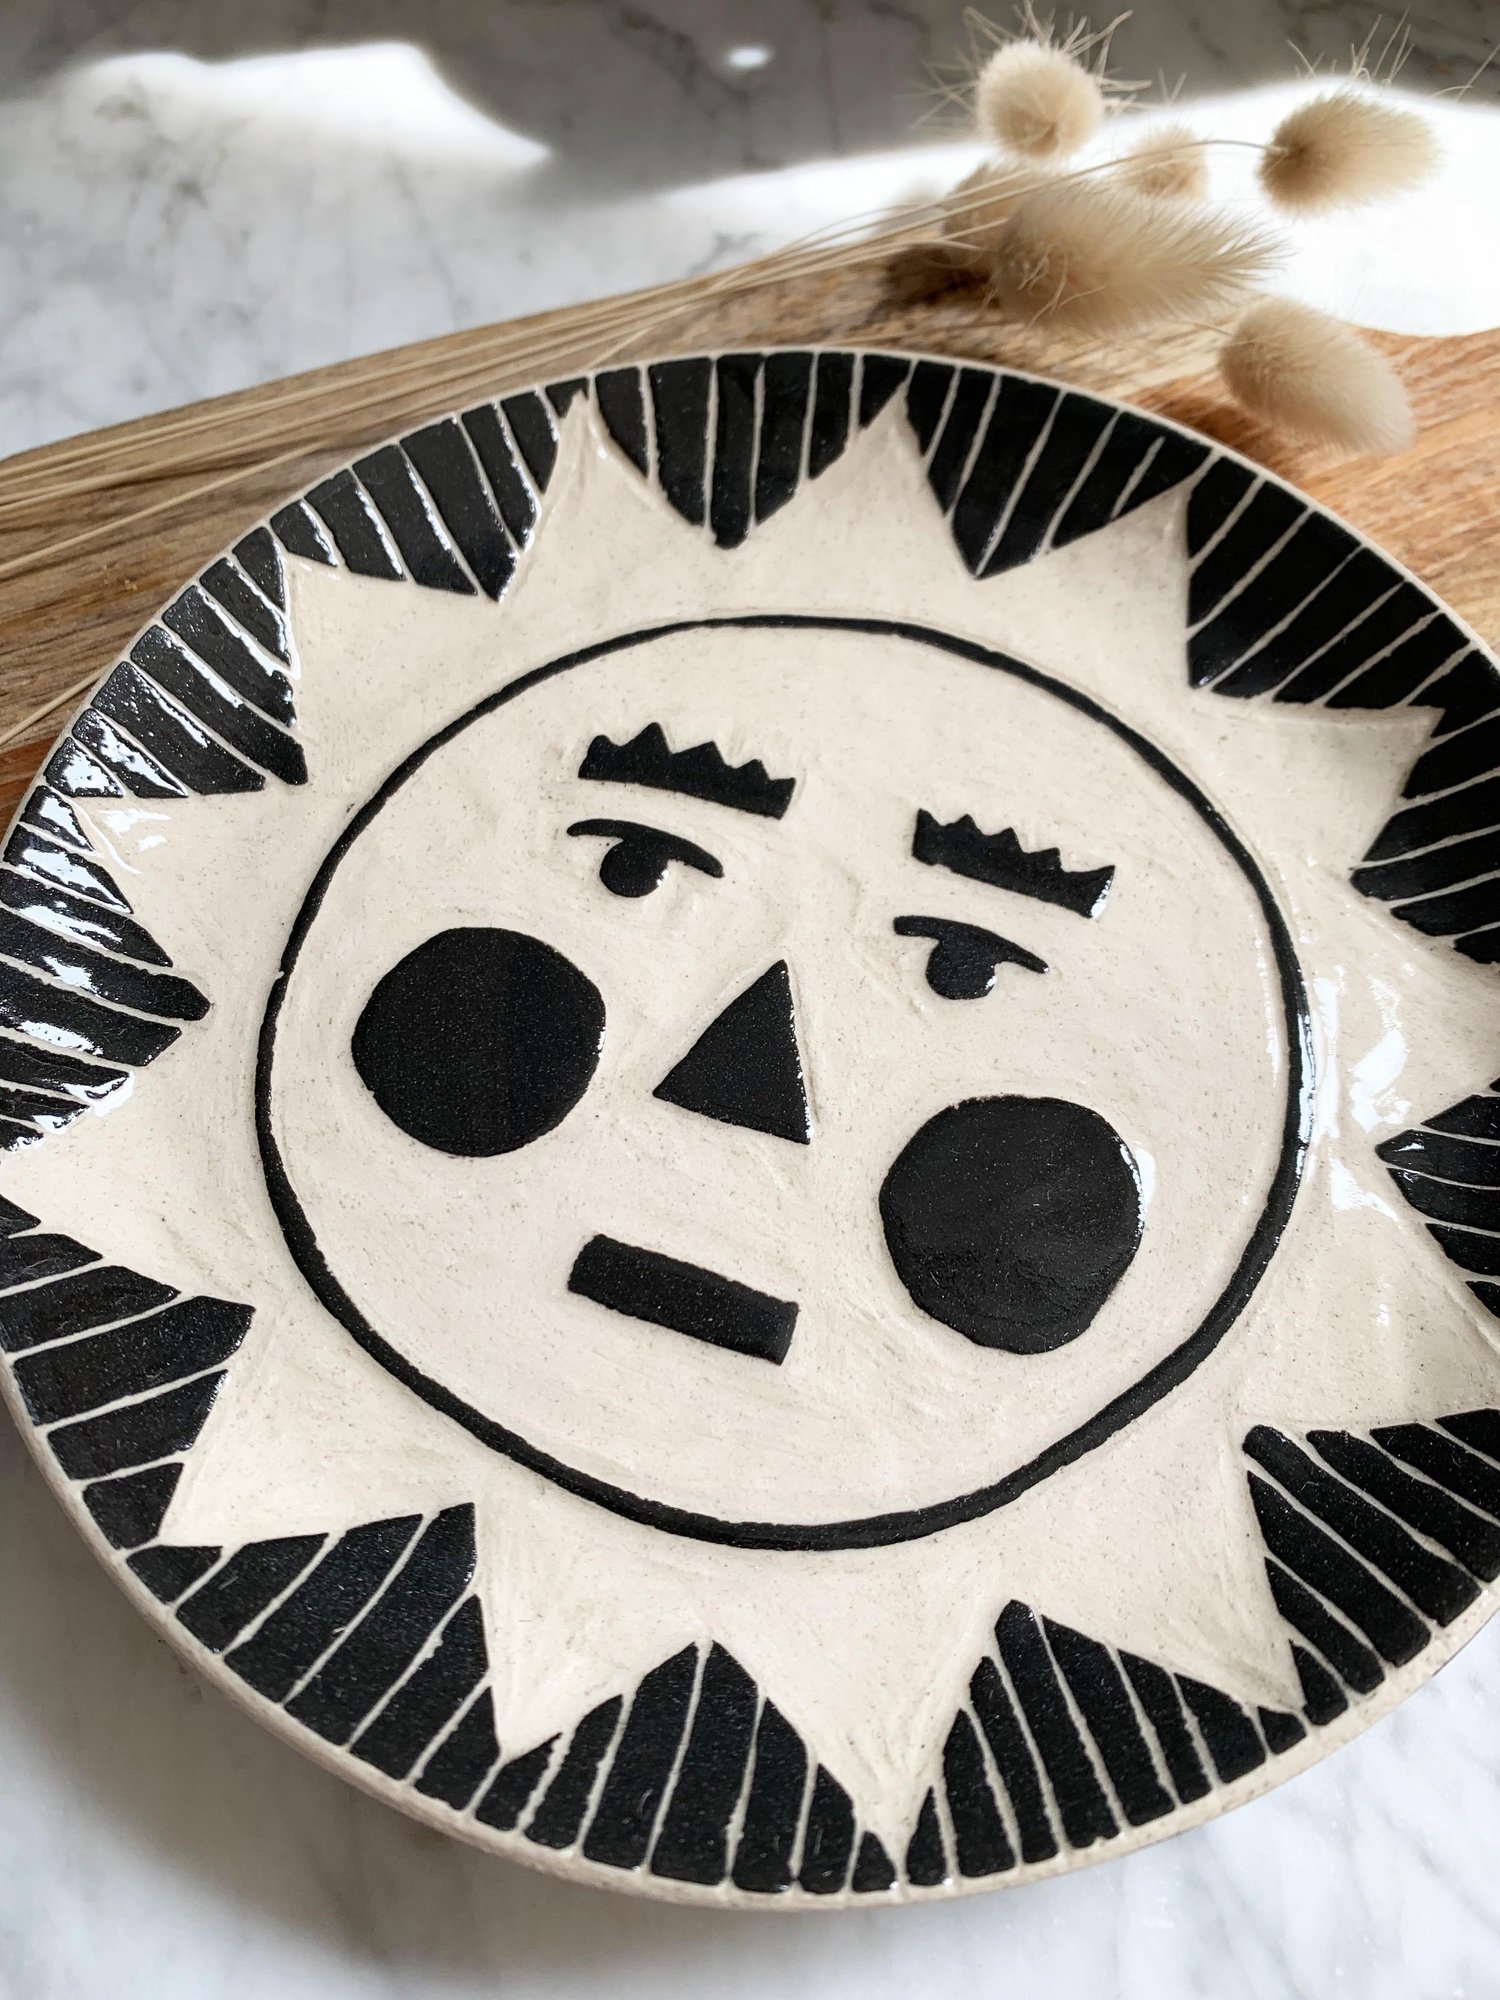 Handmade ceramic plates by Kay (available in shop), 2022